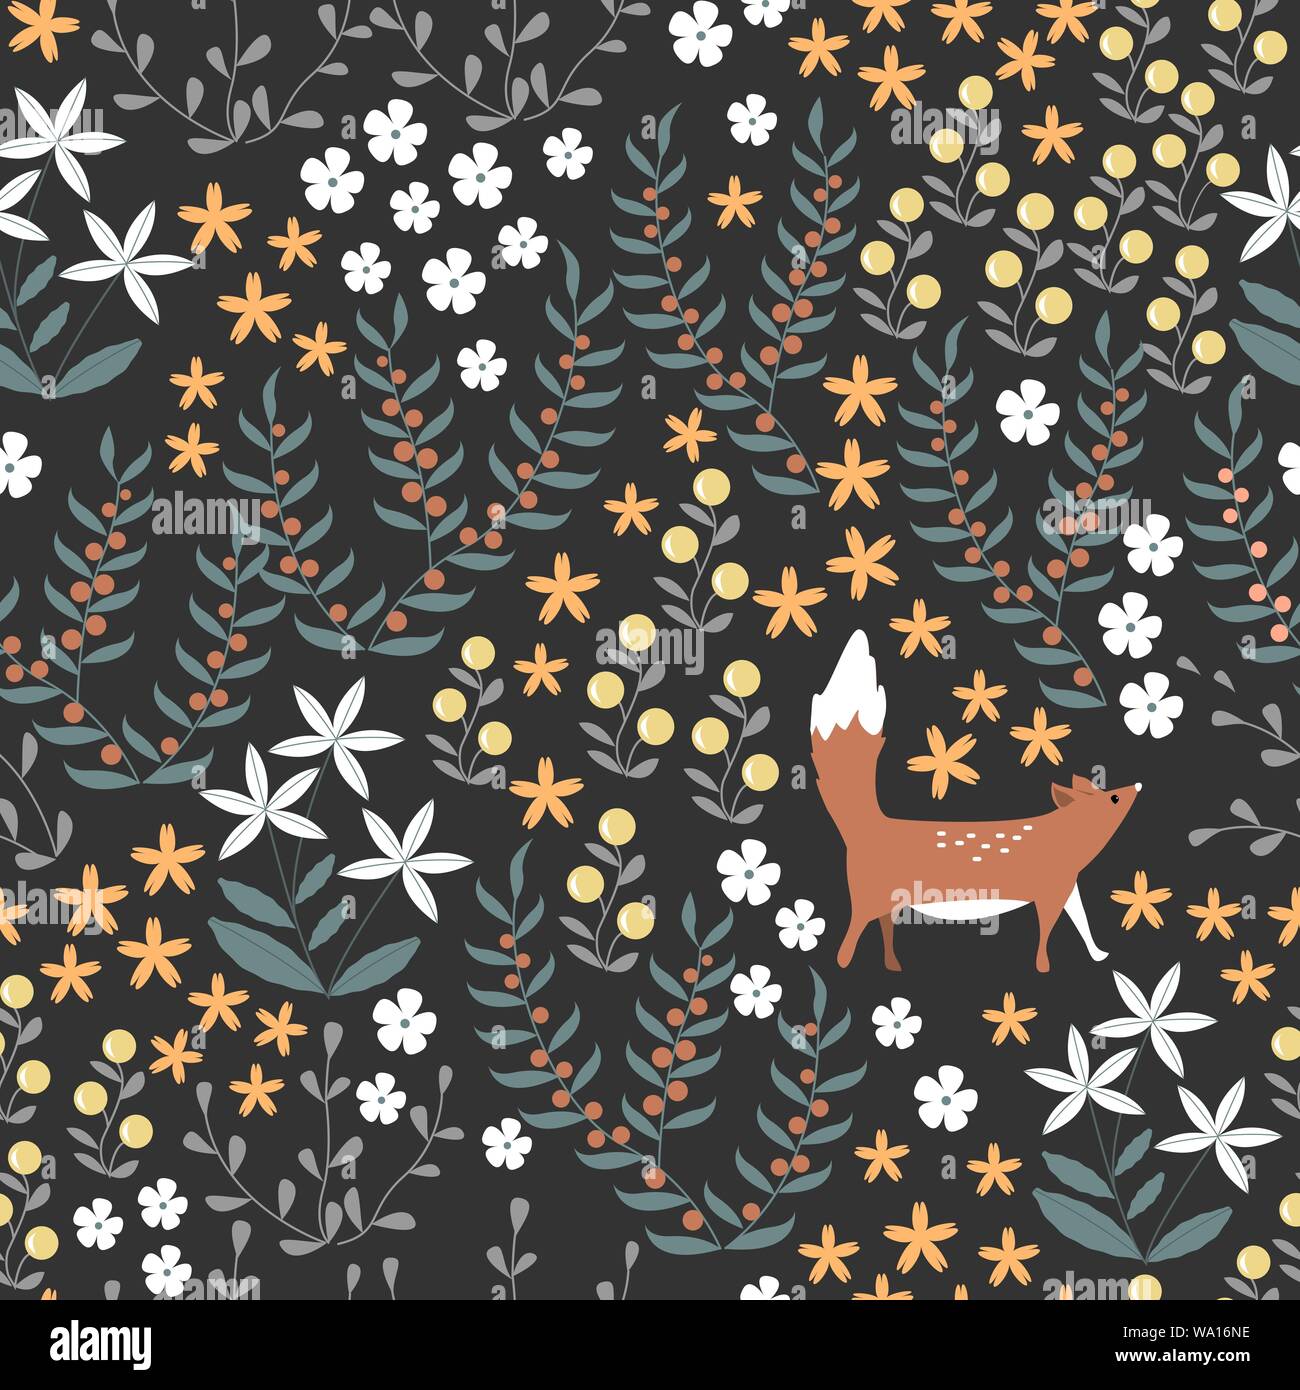 Vector floral seamless pattern with cute fox and abstract flat doodle elements such as plants, flowers, and berries. Forest nature background for Stock Vector